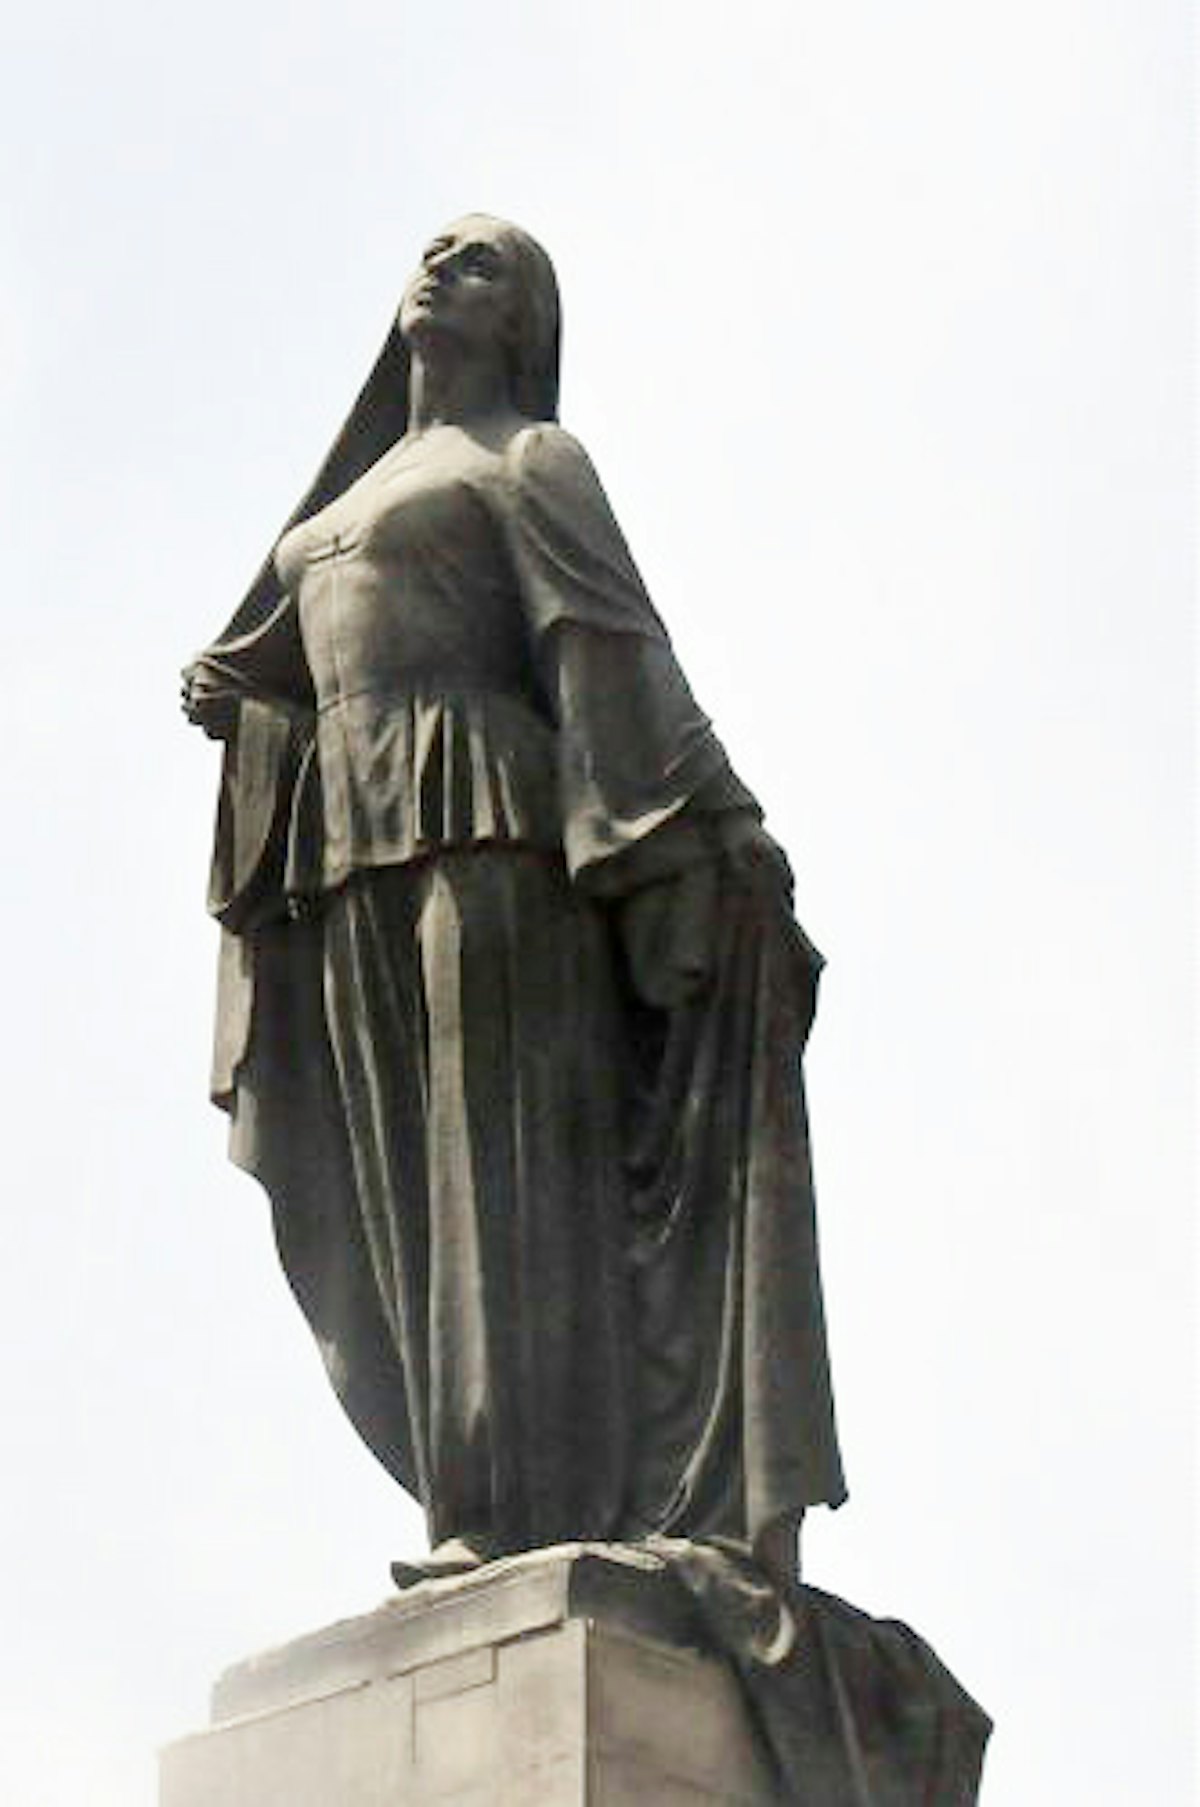 The statue of a liberated woman that stands in central Baku depicts a woman casting off her veil and is said to have been influenced by the story of Tahirih.